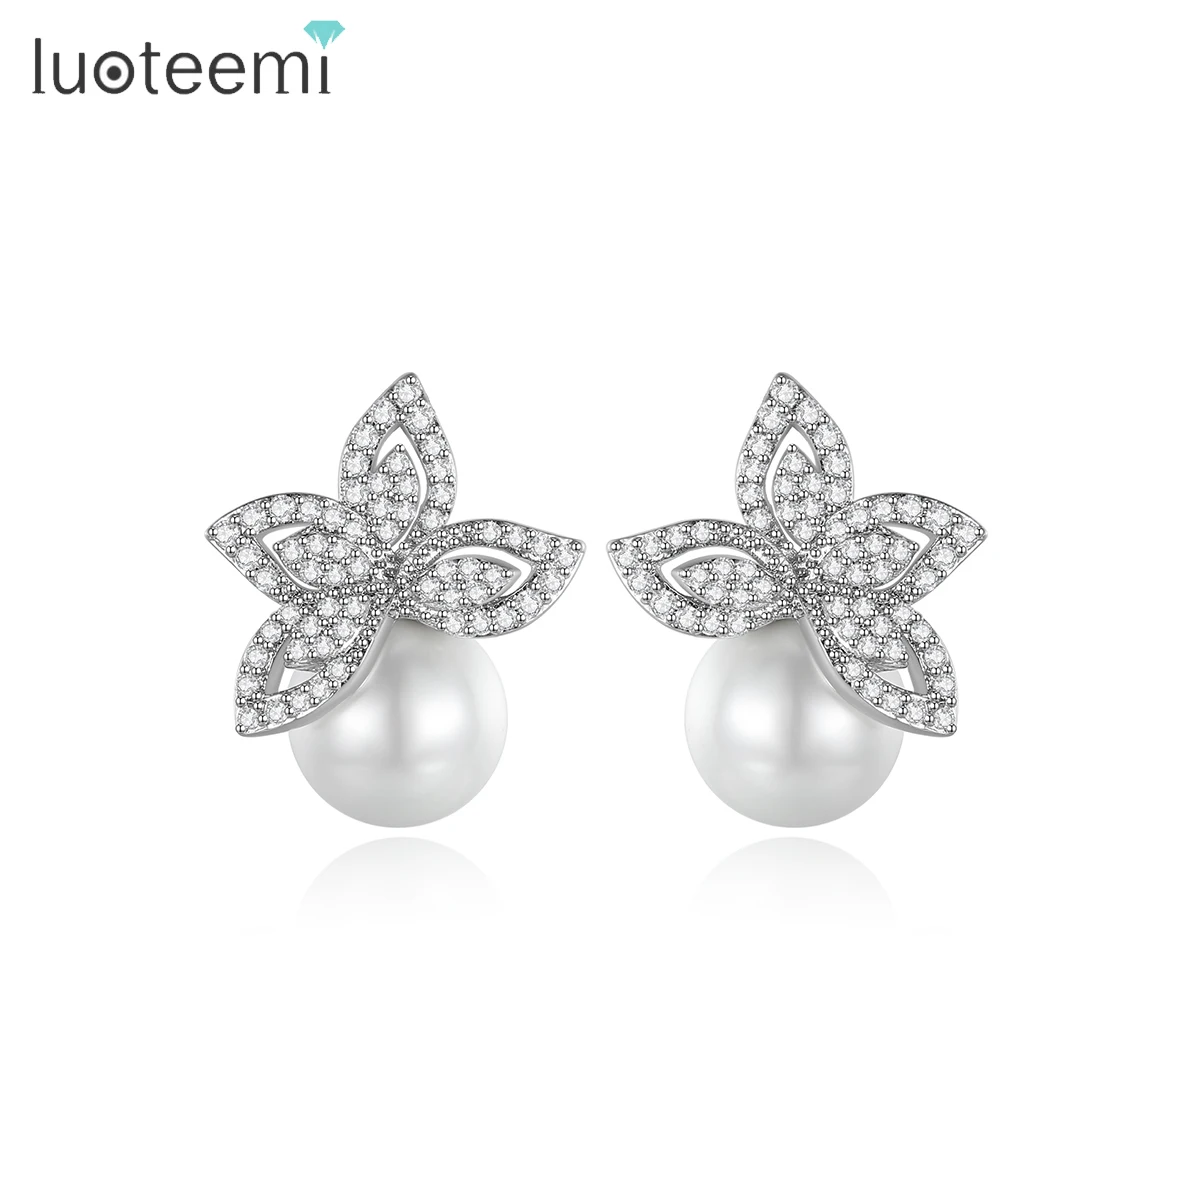 

LUOTEEMI Wholesale Free Shipping Hot sale Women Luxury Clear Cubic Zircon Paved Wedding Pearl Earrings For Brides